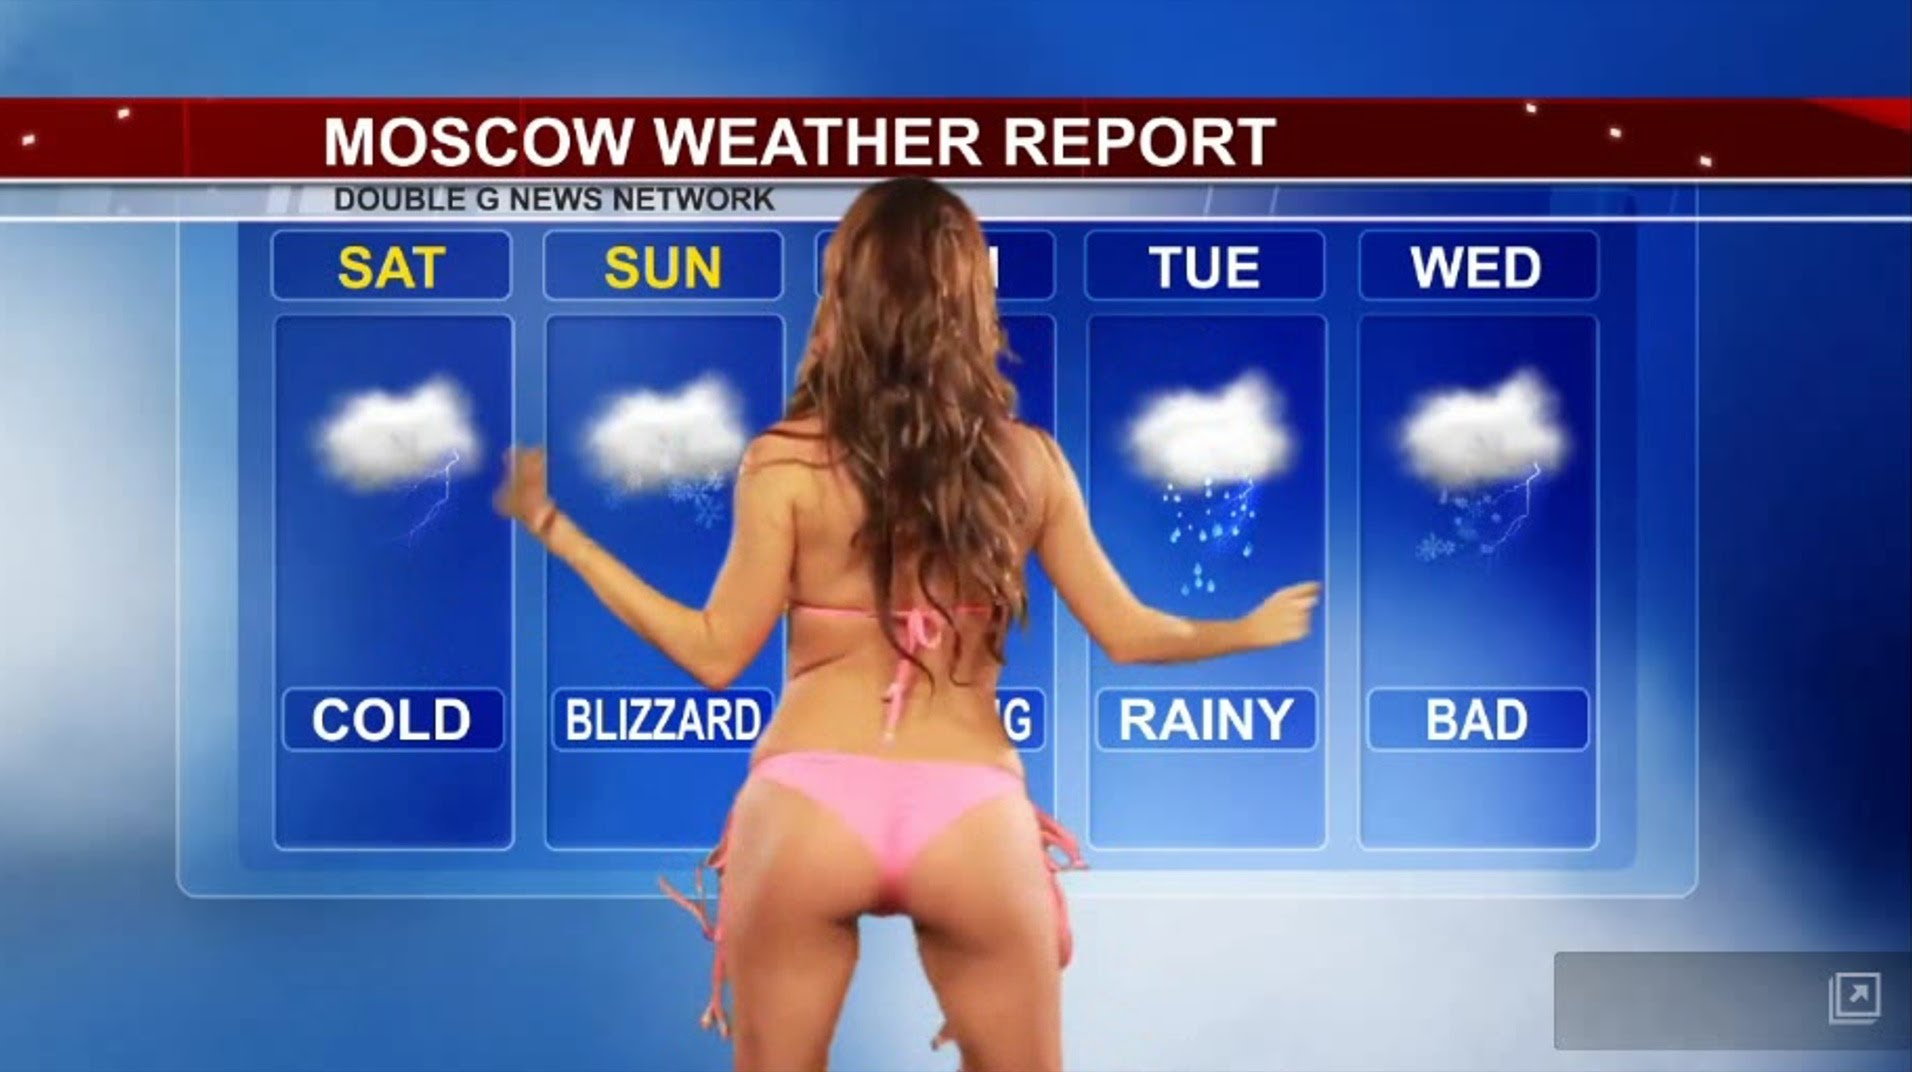 The weather girl thinks the weather in Moscow sucks though. 